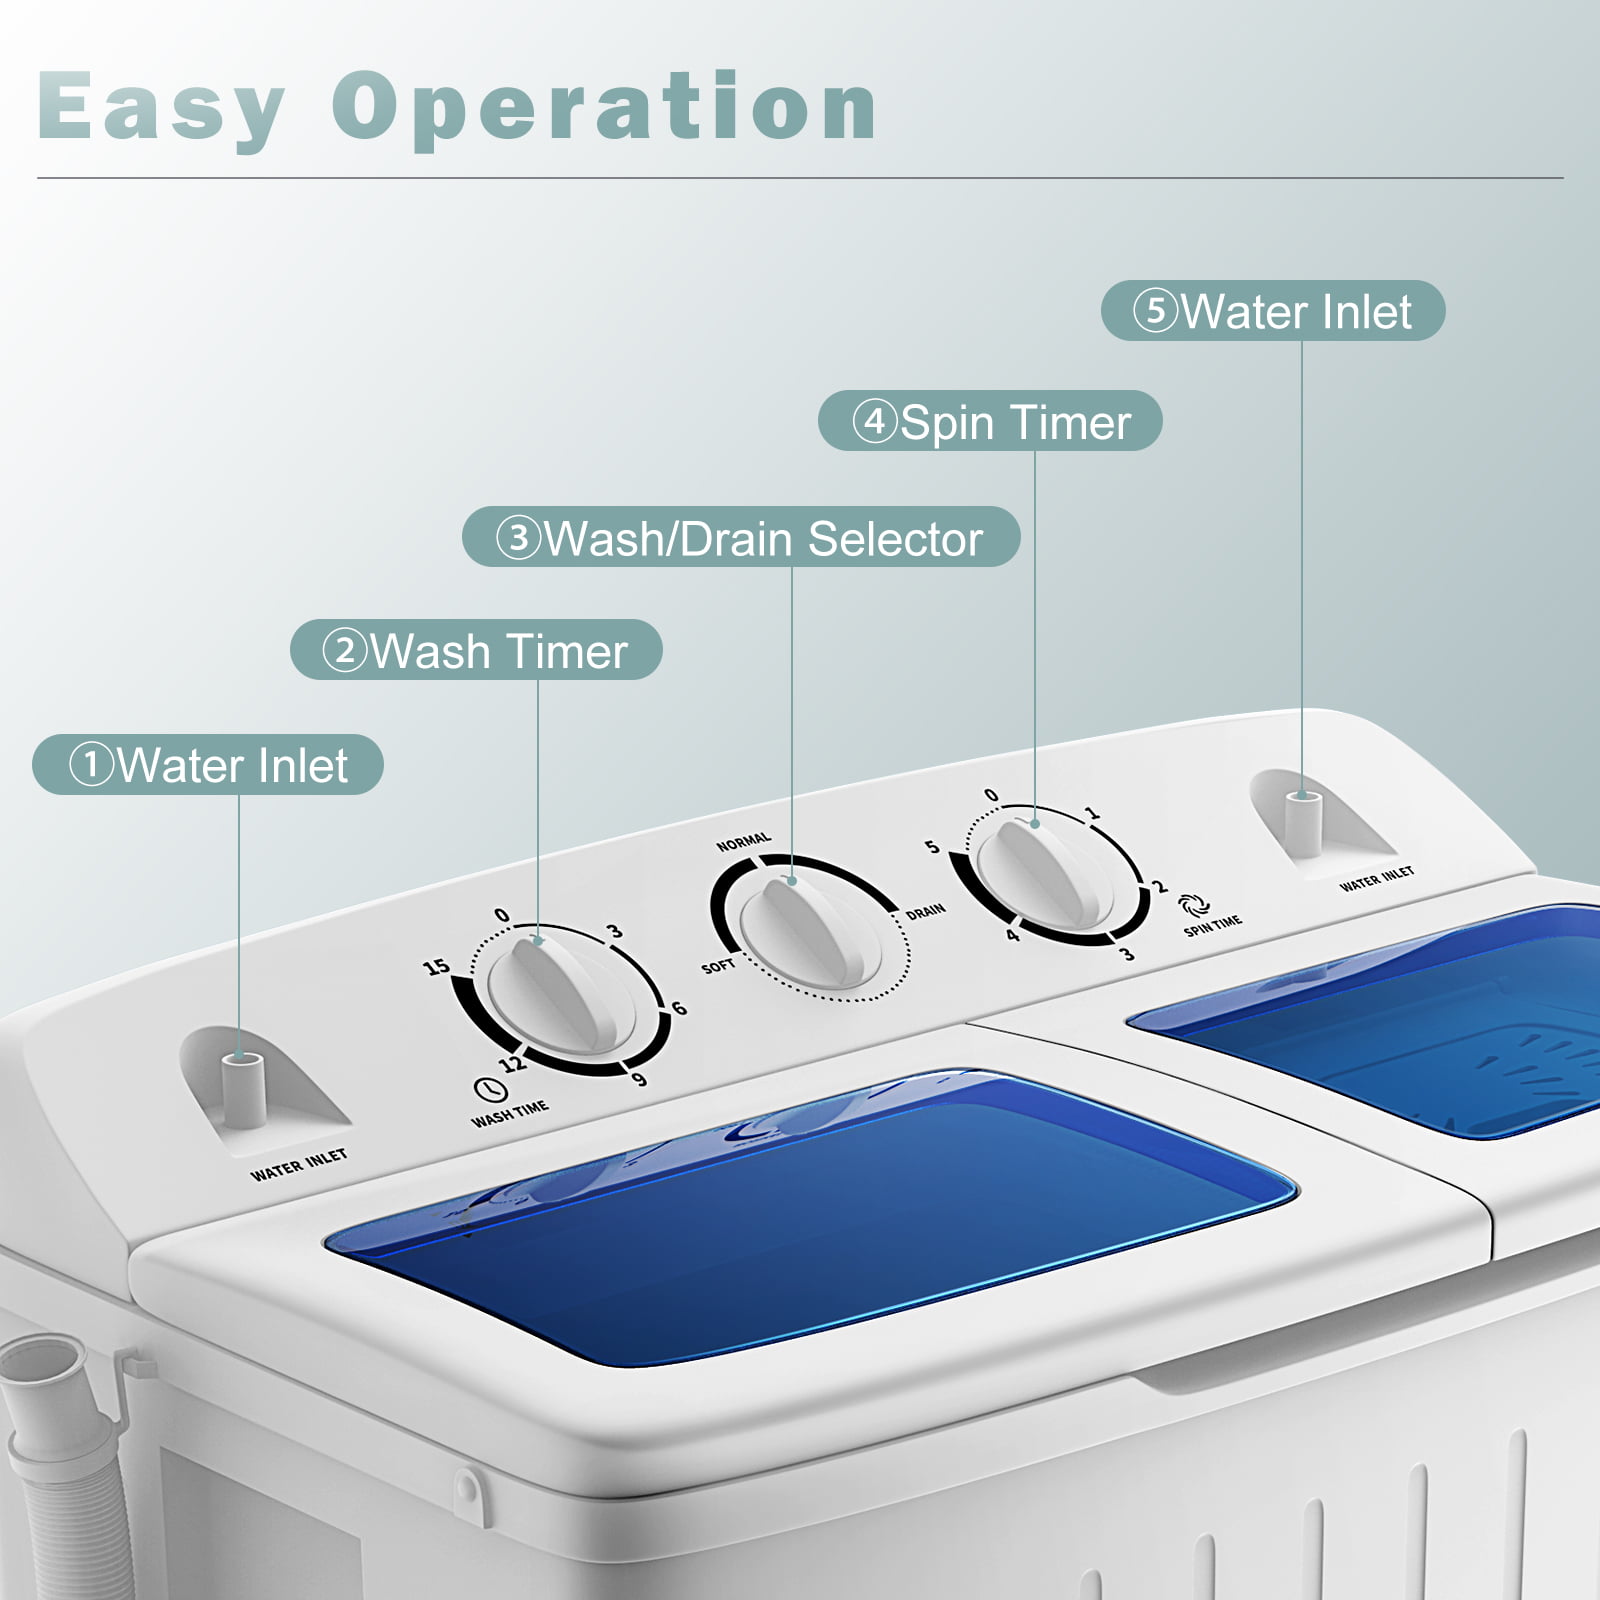 17.6 lbs Capacity 5.74 FT Power Cord HomGarden Portable Washer Compact Mini Twin Tub Washing Machine w/Washer Spinner Cycle Spin Drye Built-in Gravity Pump 